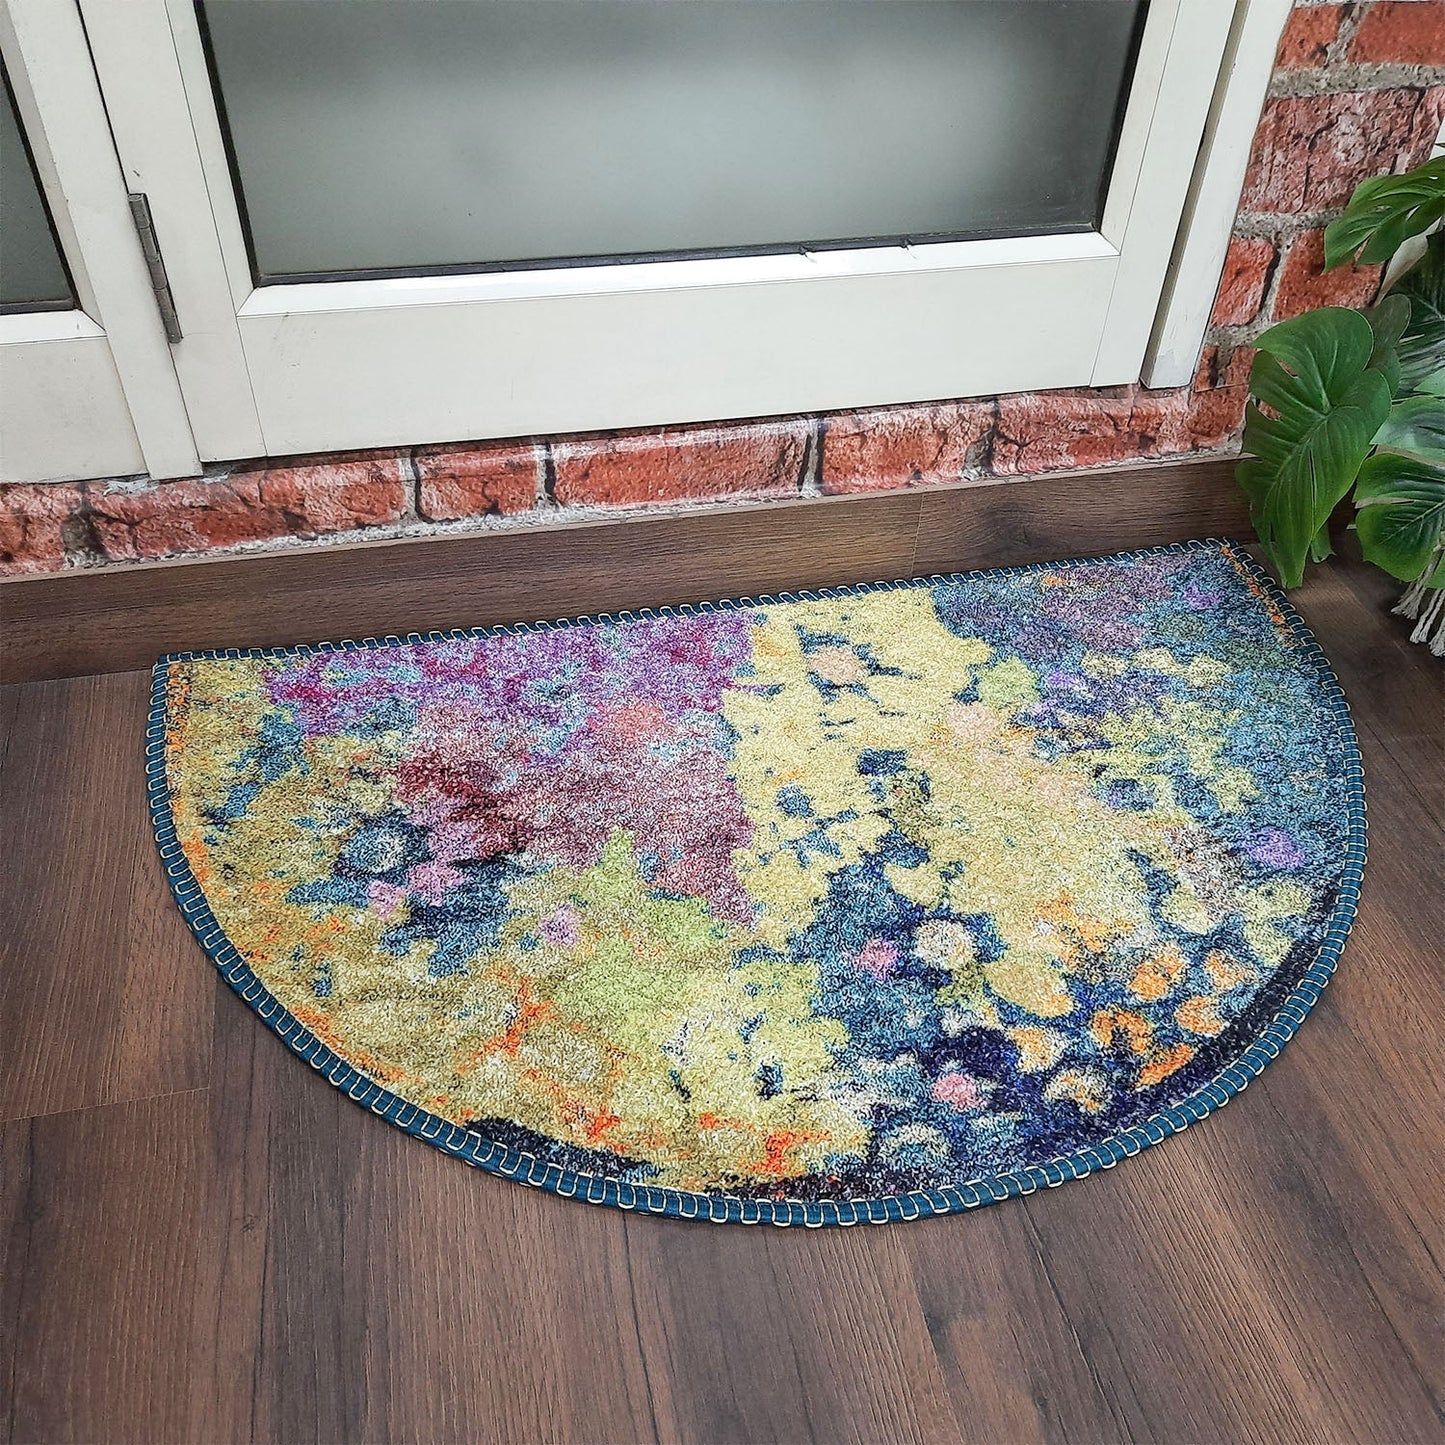 Avioni Home Floor Mats in Beautiful Colorful Abstract Design | Anti Slip, Durable & Washable | Outdoor & Indoor